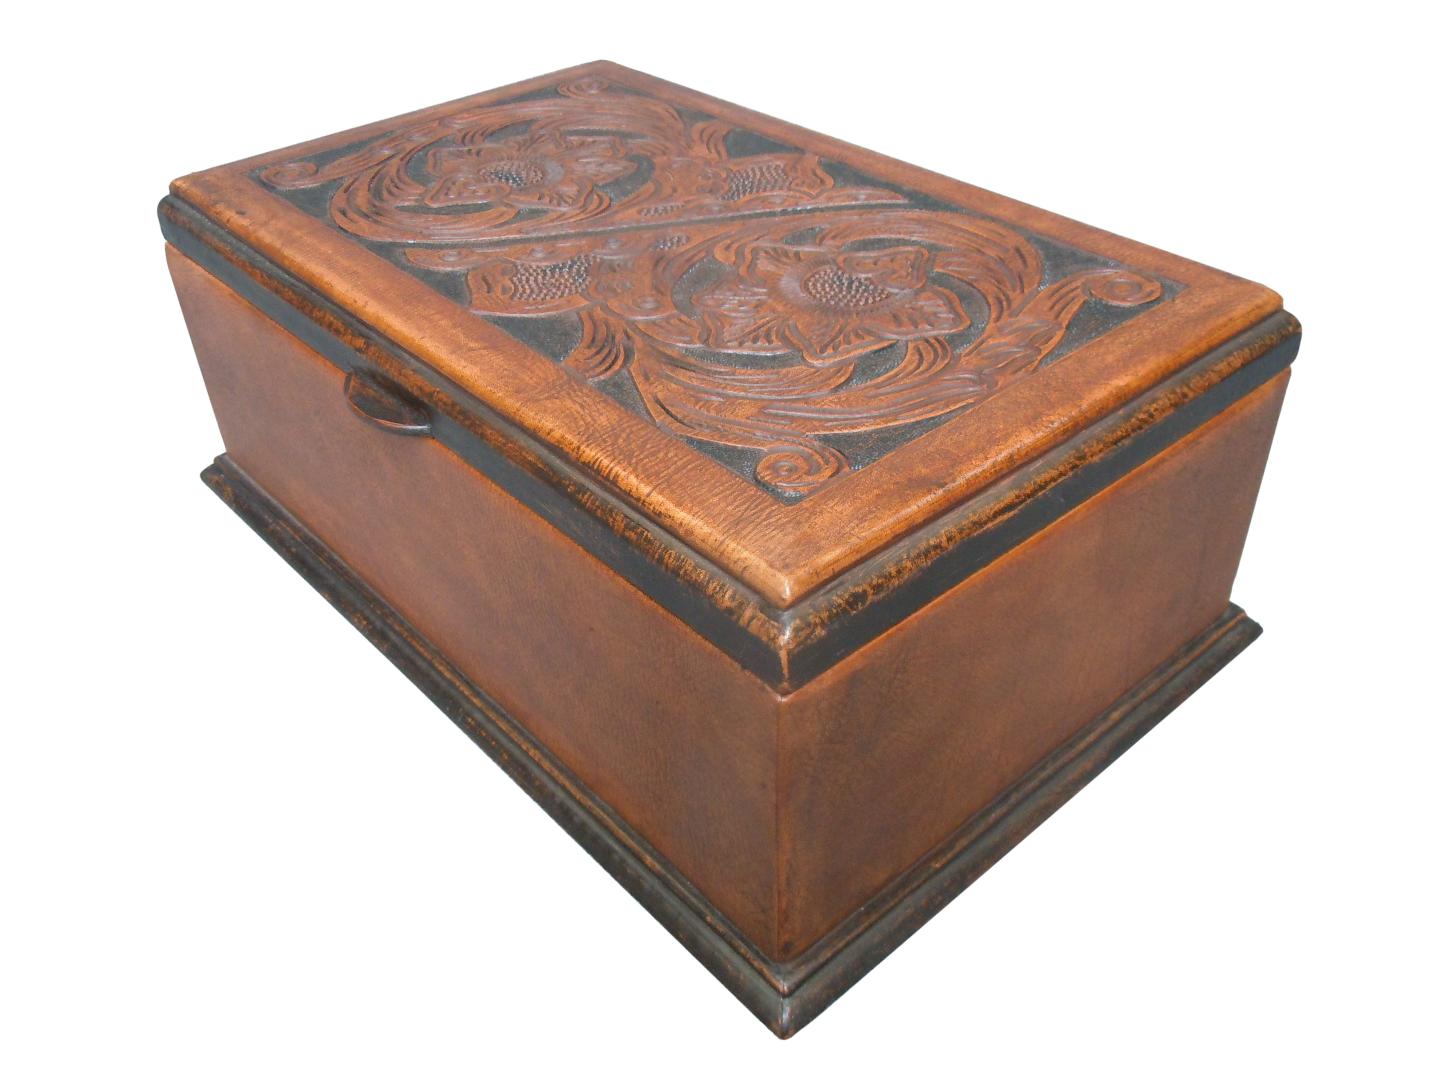 leather box with a western design on the top